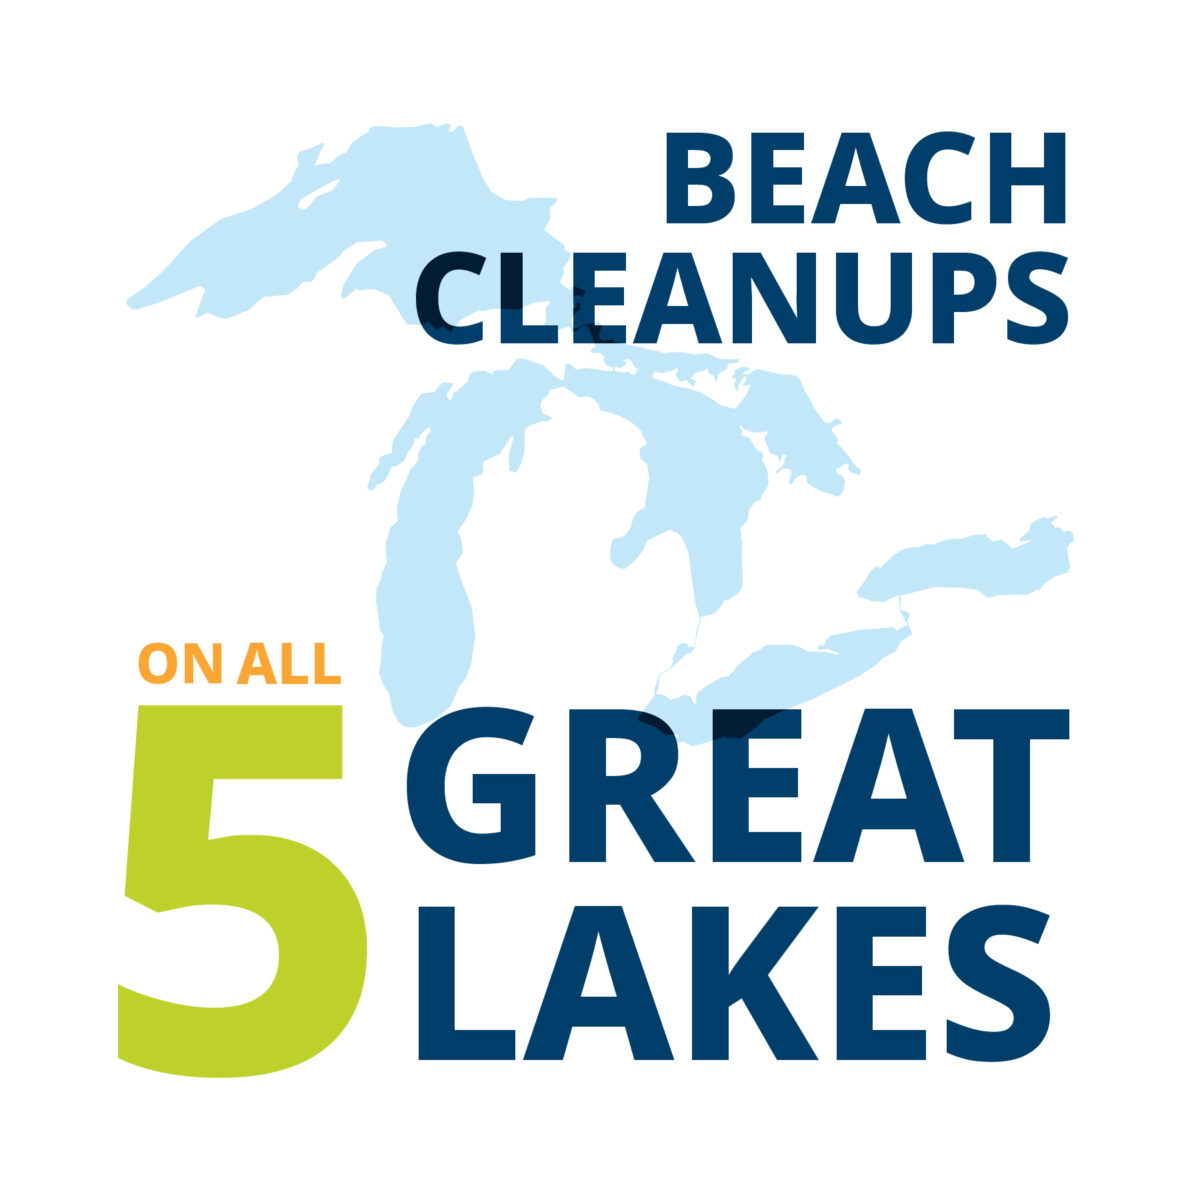 Beach cleanups on all 5 Great Lakes.